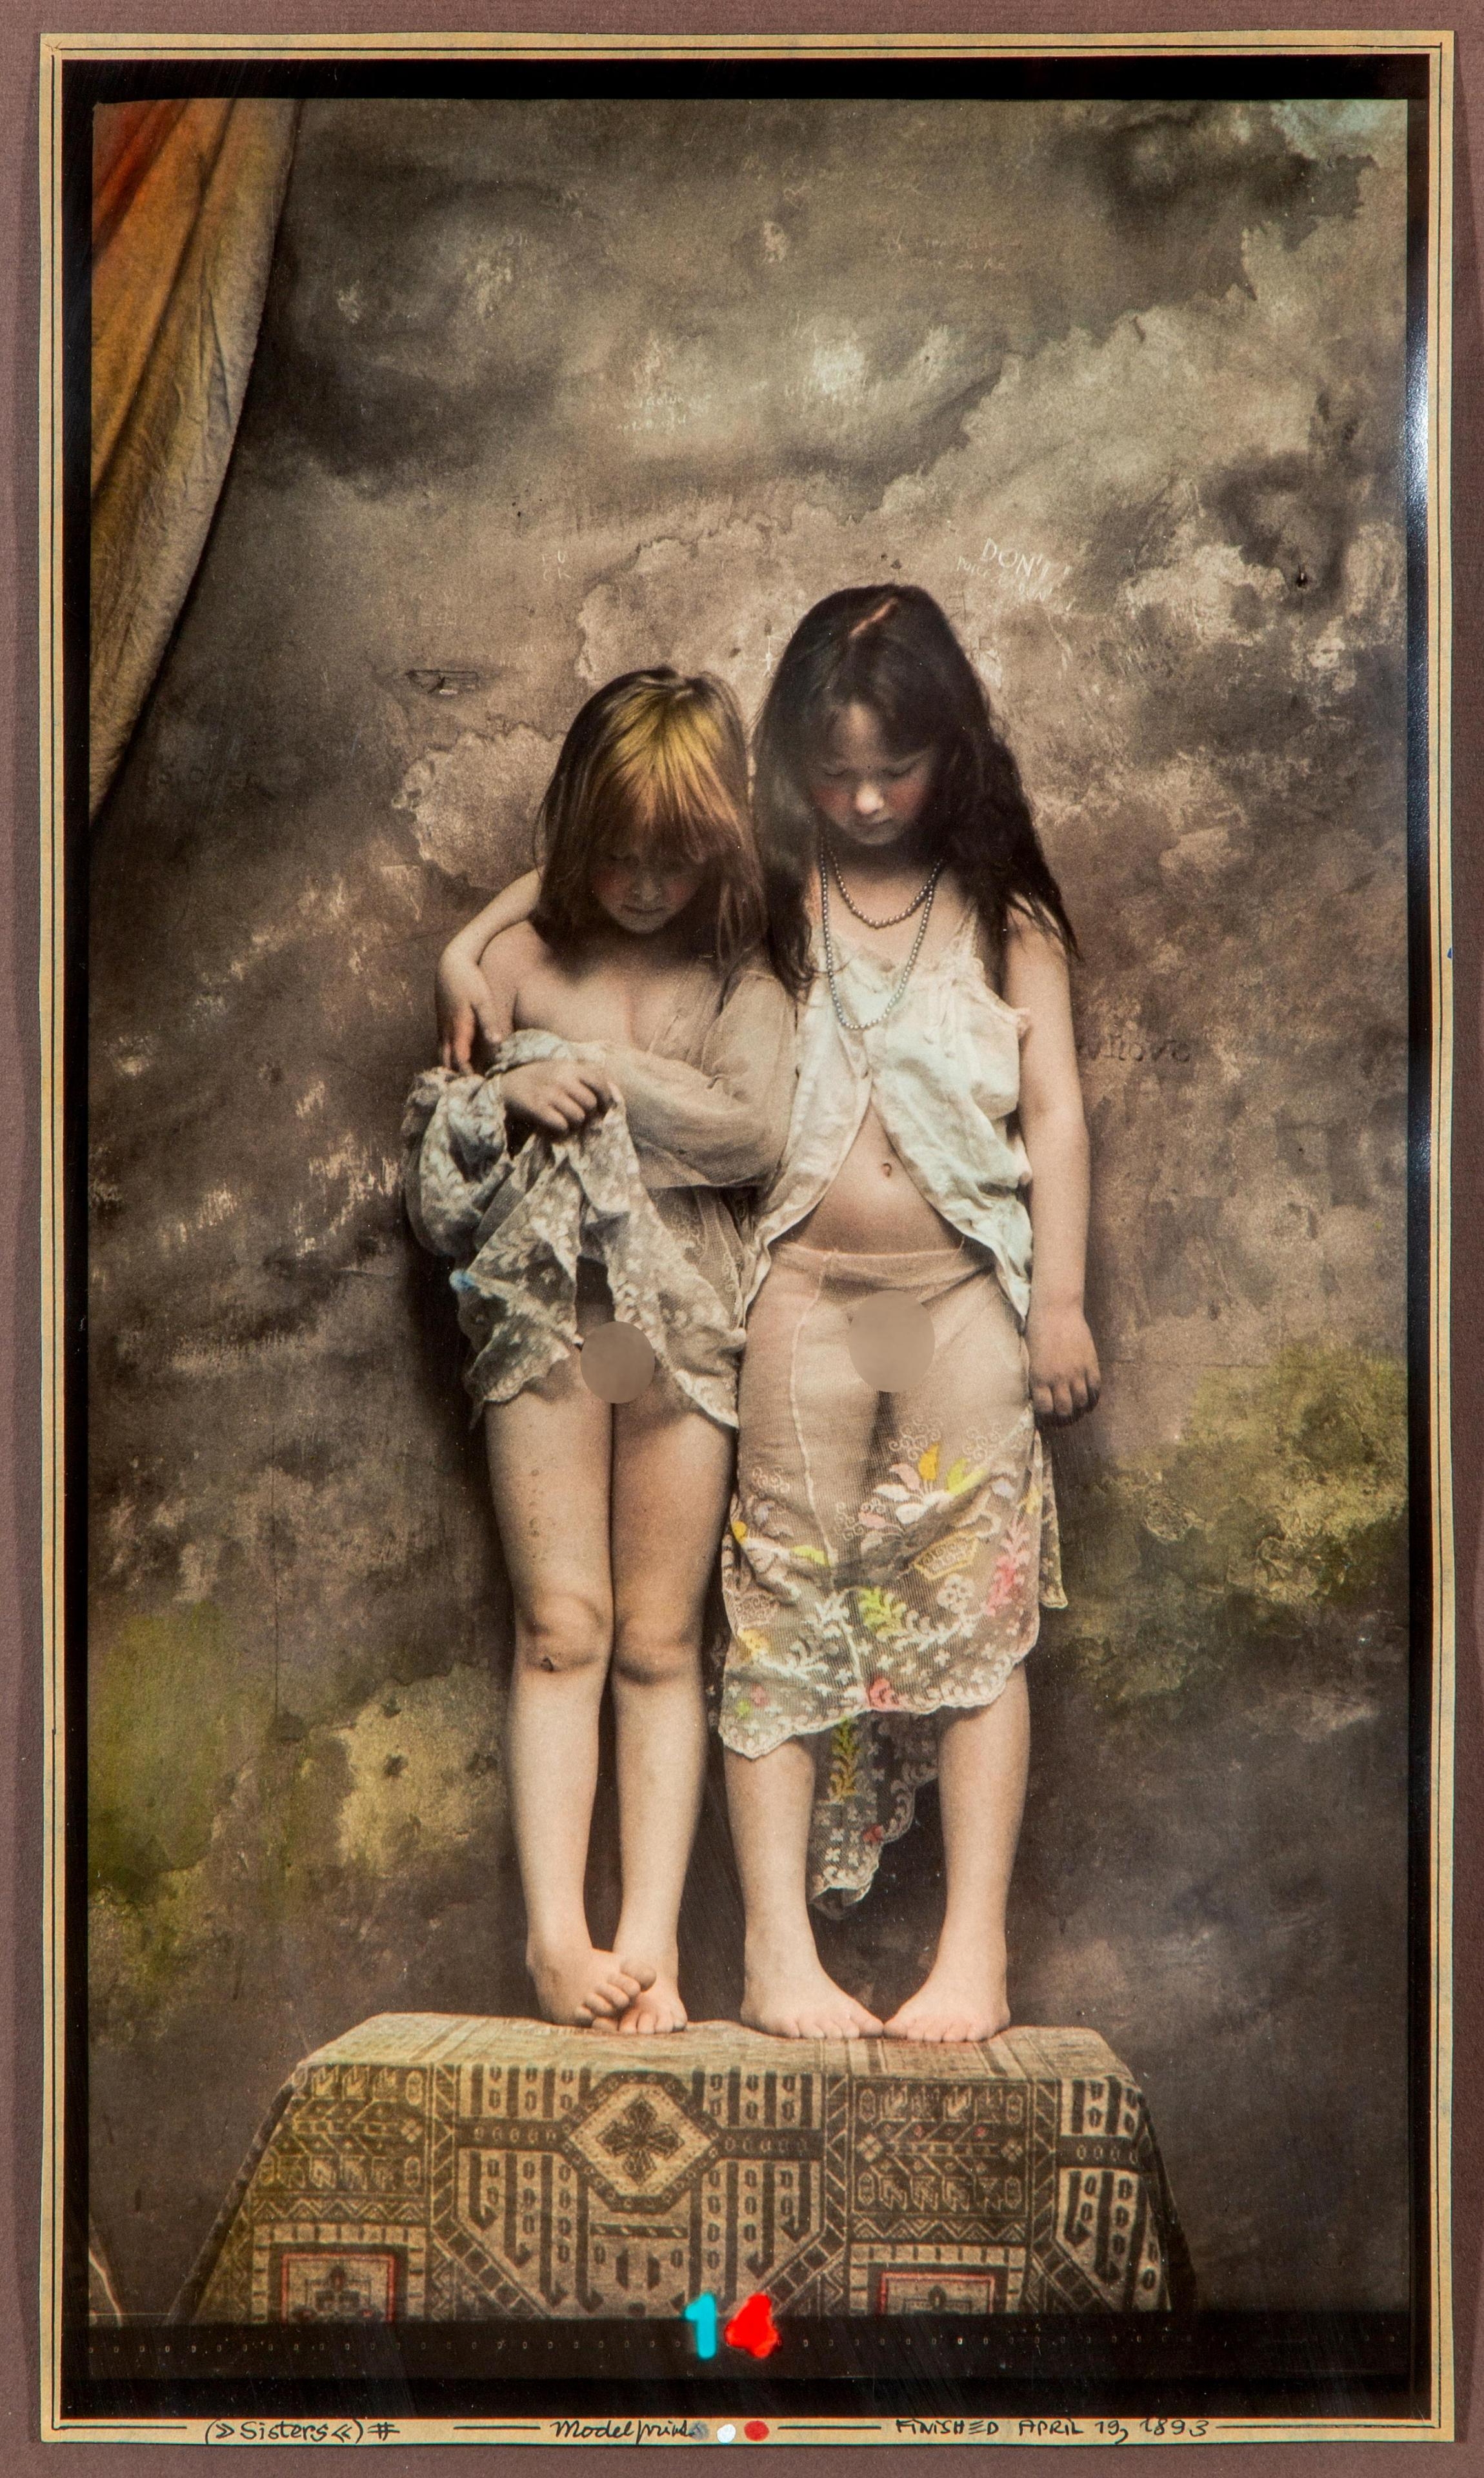 Artwork by Jan Saudek, Sisters, Made of gelatin silver print with hand-colouring